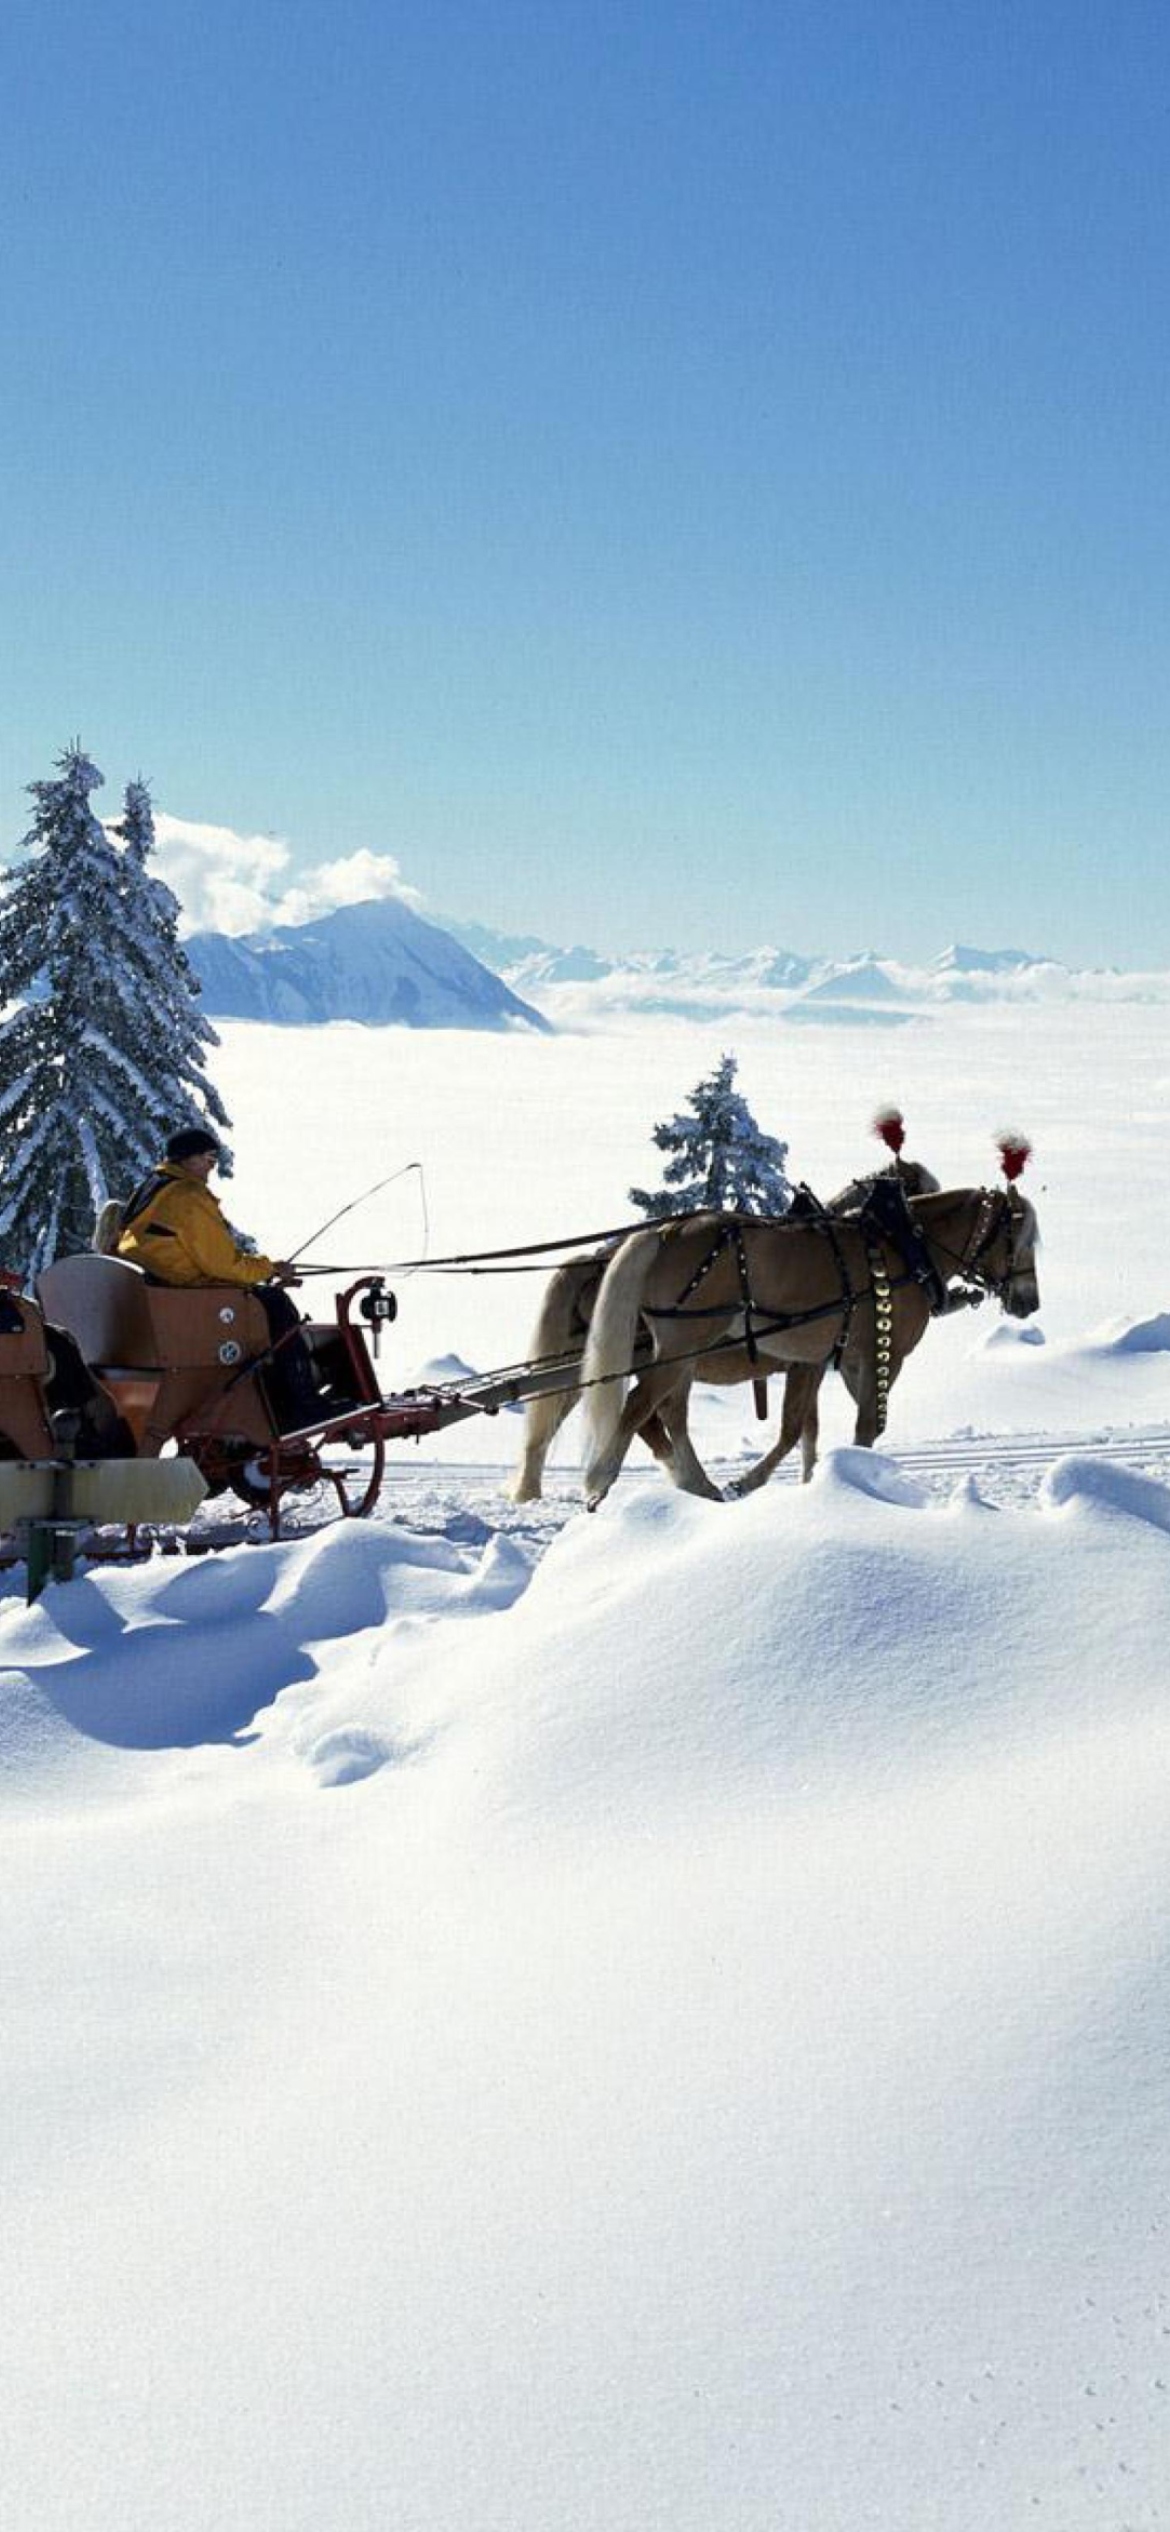 Winter Snow And Sleigh With Horses wallpaper 1170x2532